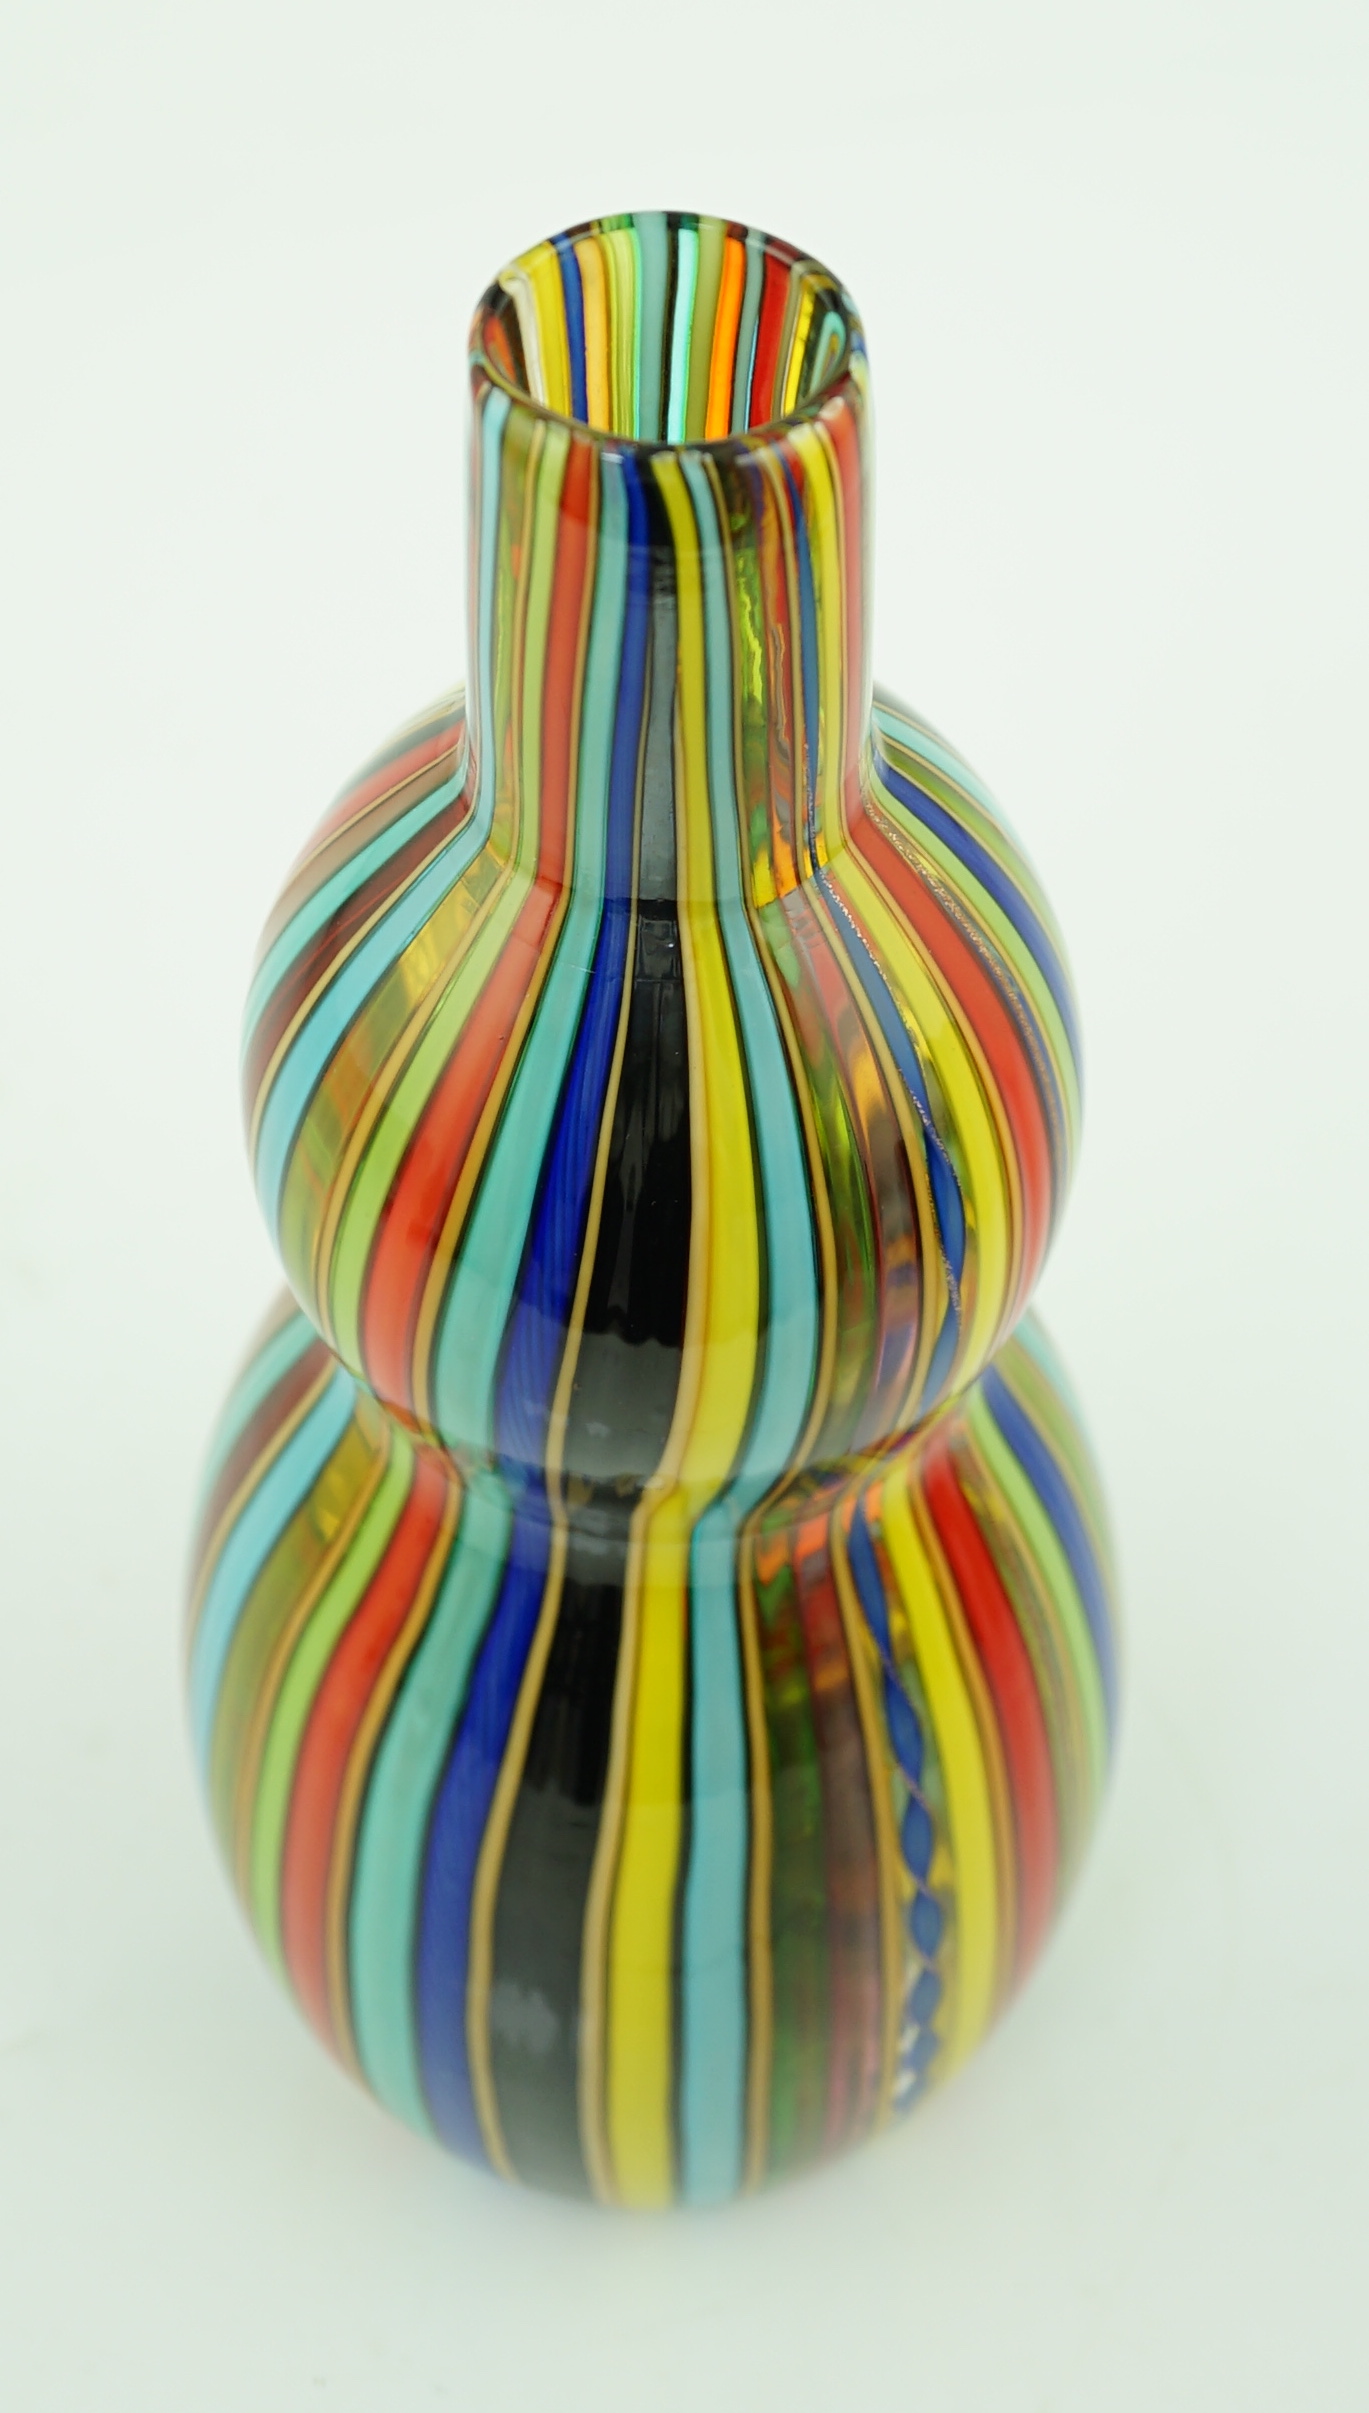 Vittorio Ferro (1932-2012) A Murano glass Murrine vase, double gourd shaped, with vertical polychrome canes, signed, 27cms, Please note this lot attracts an additional import tax of 20% on the hammer price